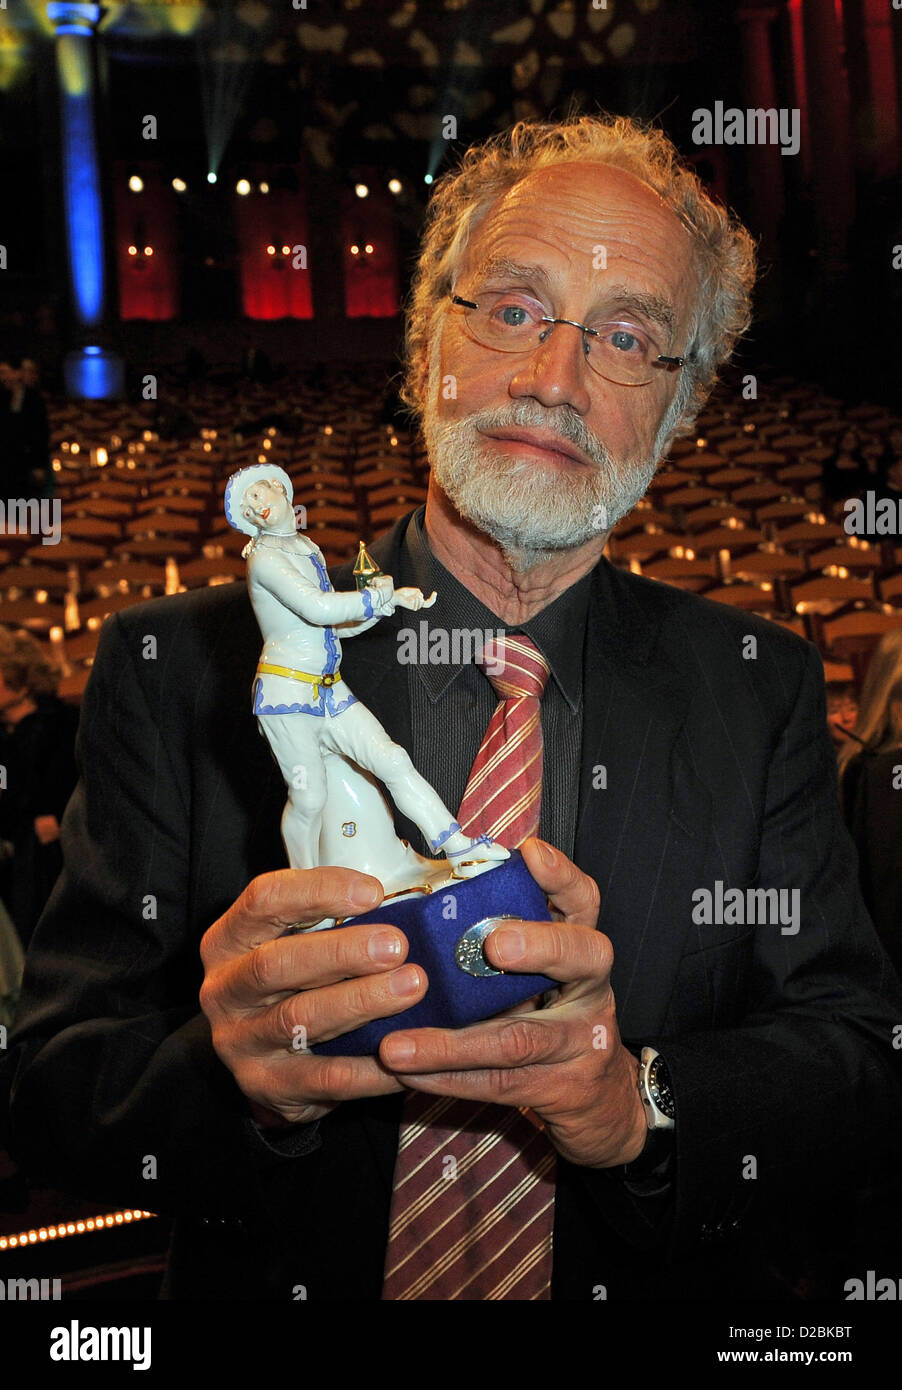 German film director Markus Imhoof poses with his award in his hands after the awarded ceremony of the Bavarian Film Awards 2012 in Munich, Germany, 18 January 2013. Bavarian Film Prize is one of the most sought after film awards in the German film industry. Photo: Ursula Dueren Stock Photo